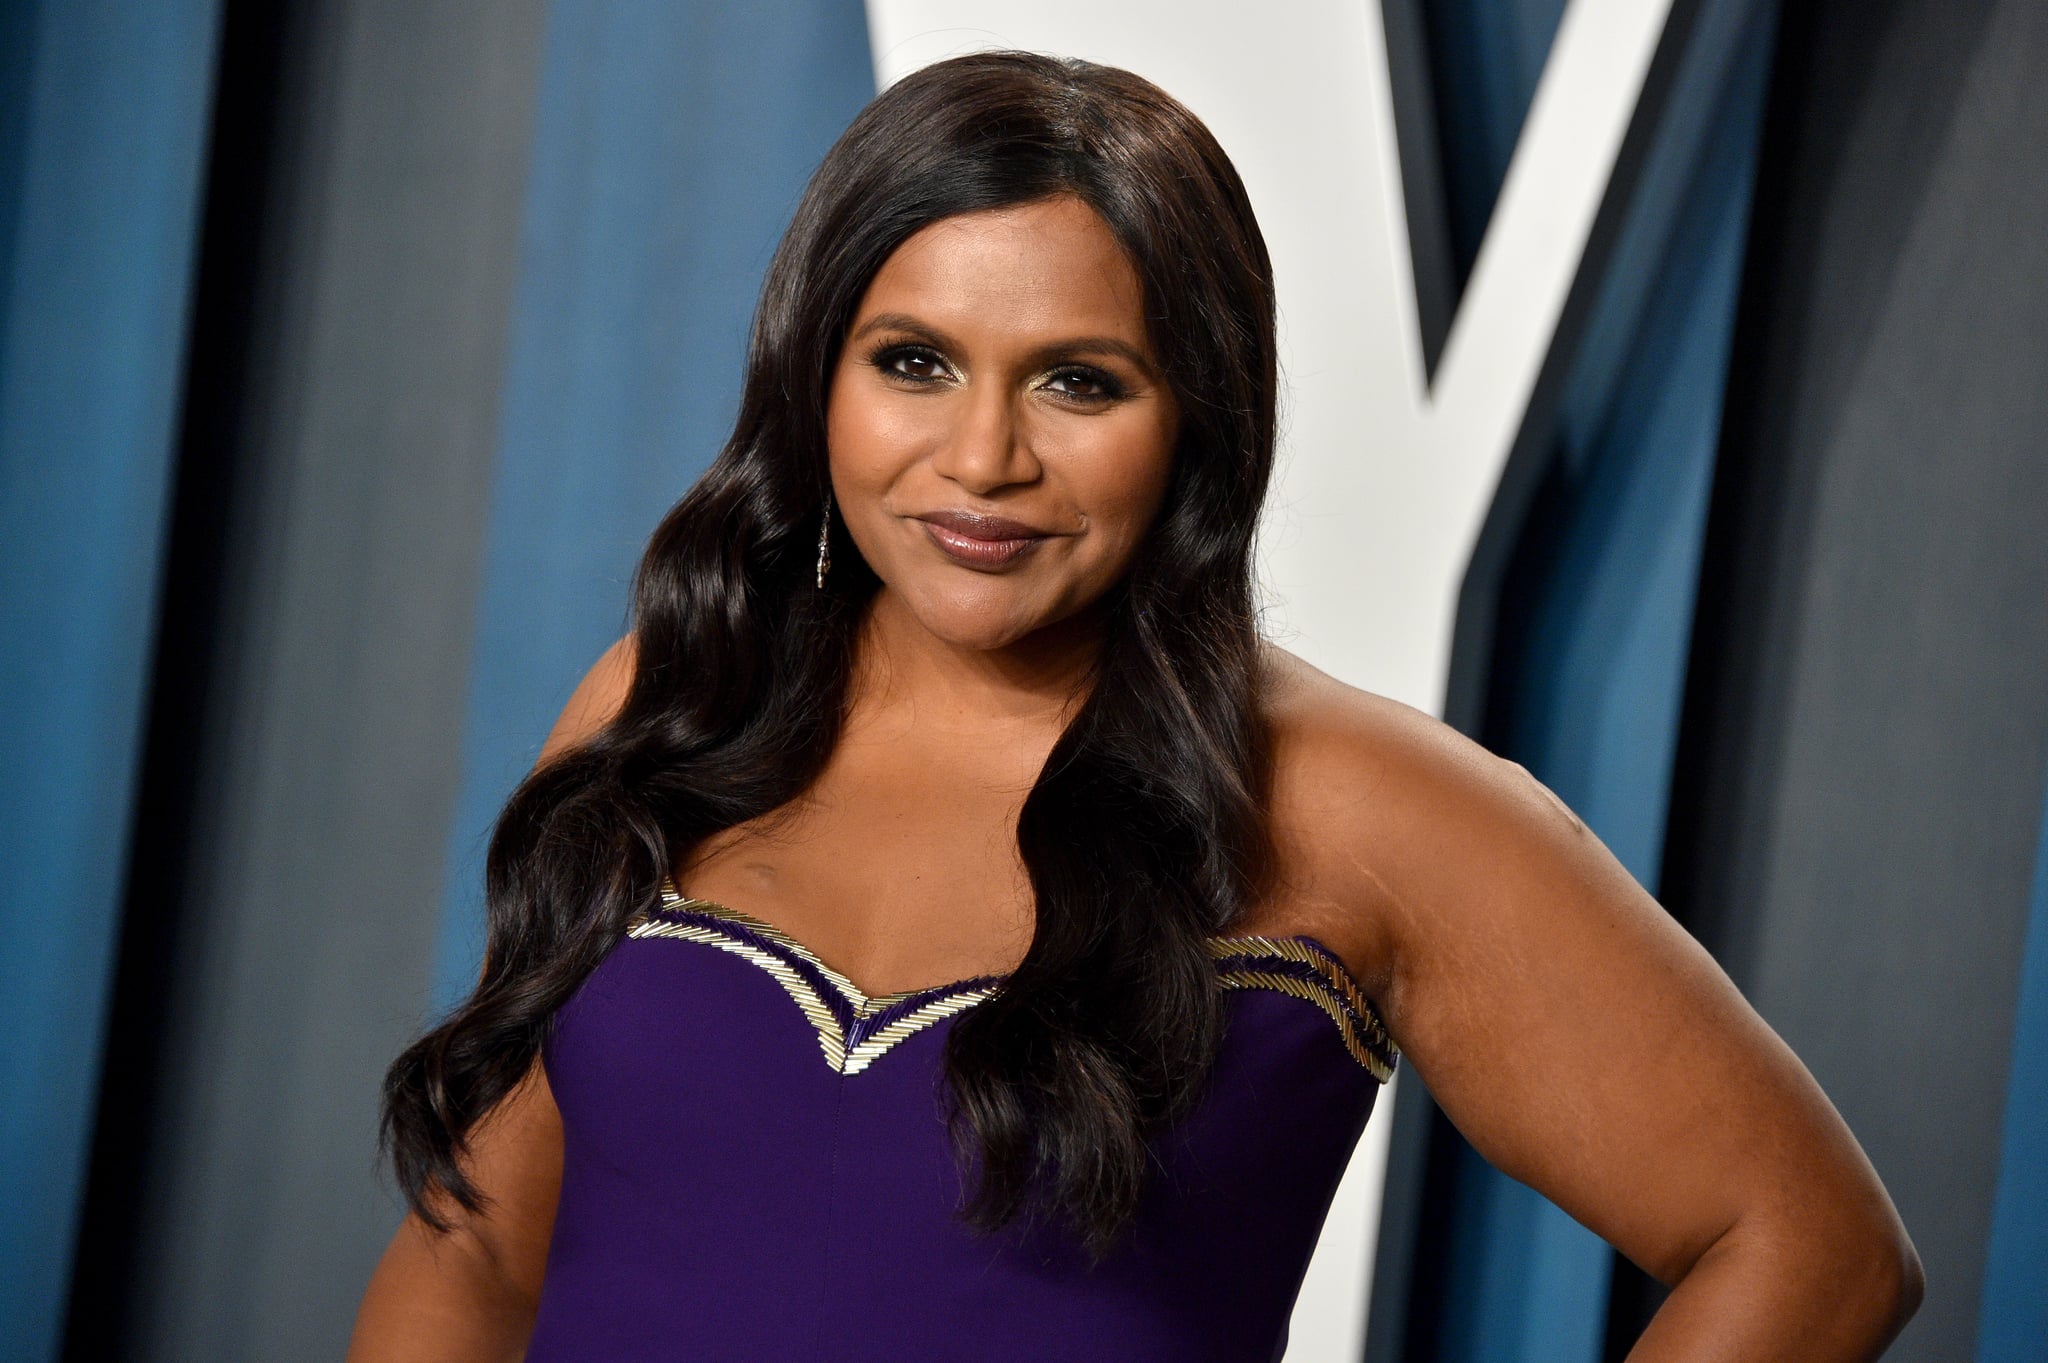 BEVERLY HILLS, CALIFORNIA - FEBRUARY 09: Mindy Kaling attends the 2020 Vanity Fair Oscar Party hosted by Radhika Jones at Wallis Annenberg Center for the Performing Arts on February 09, 2020 in Beverly Hills, California. (Photo by Gregg DeGuire/FilmMagic)